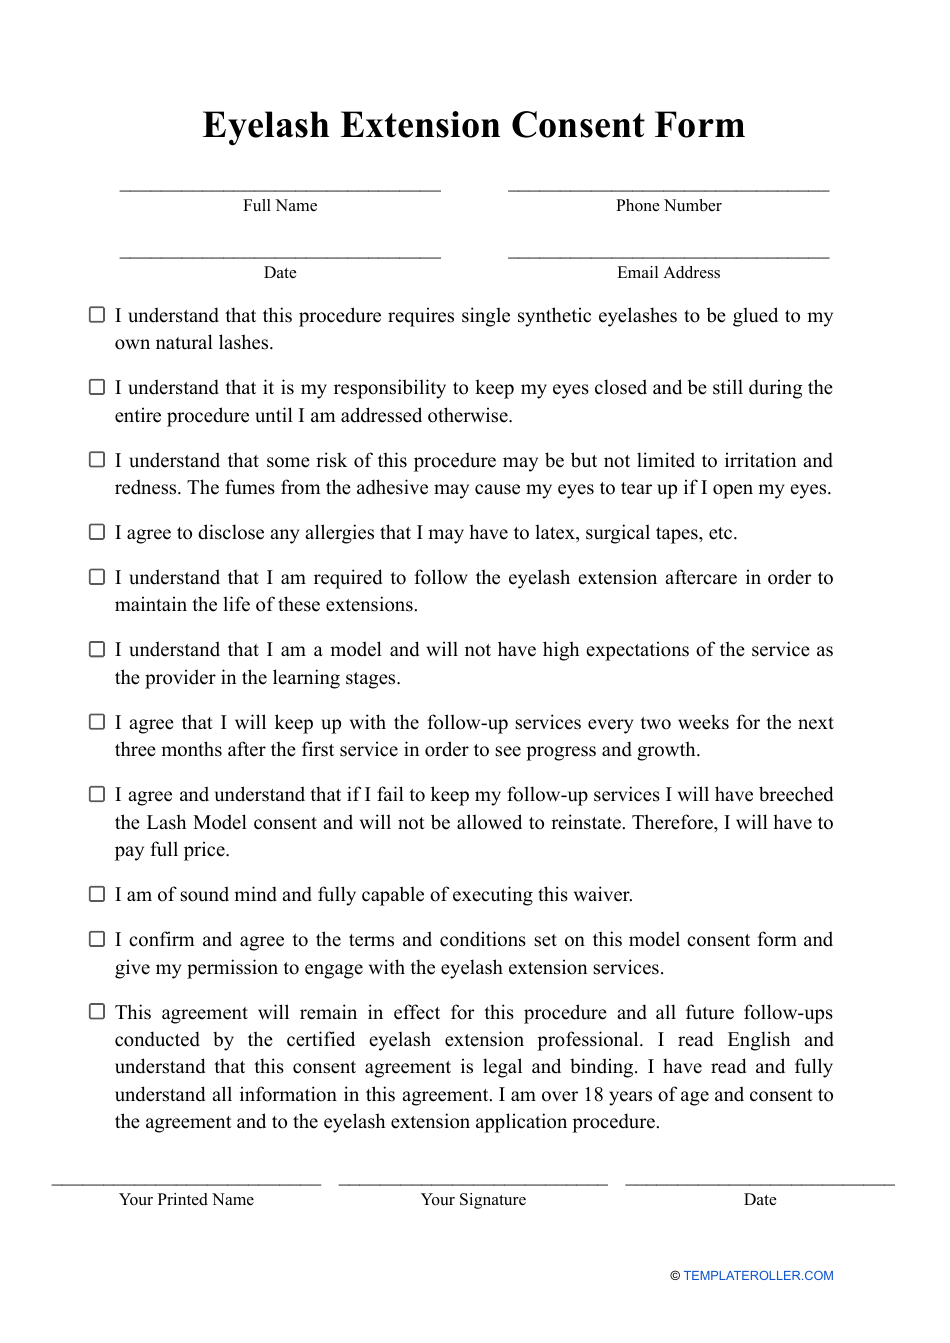 Eyelash Extension Consent Form, Page 1